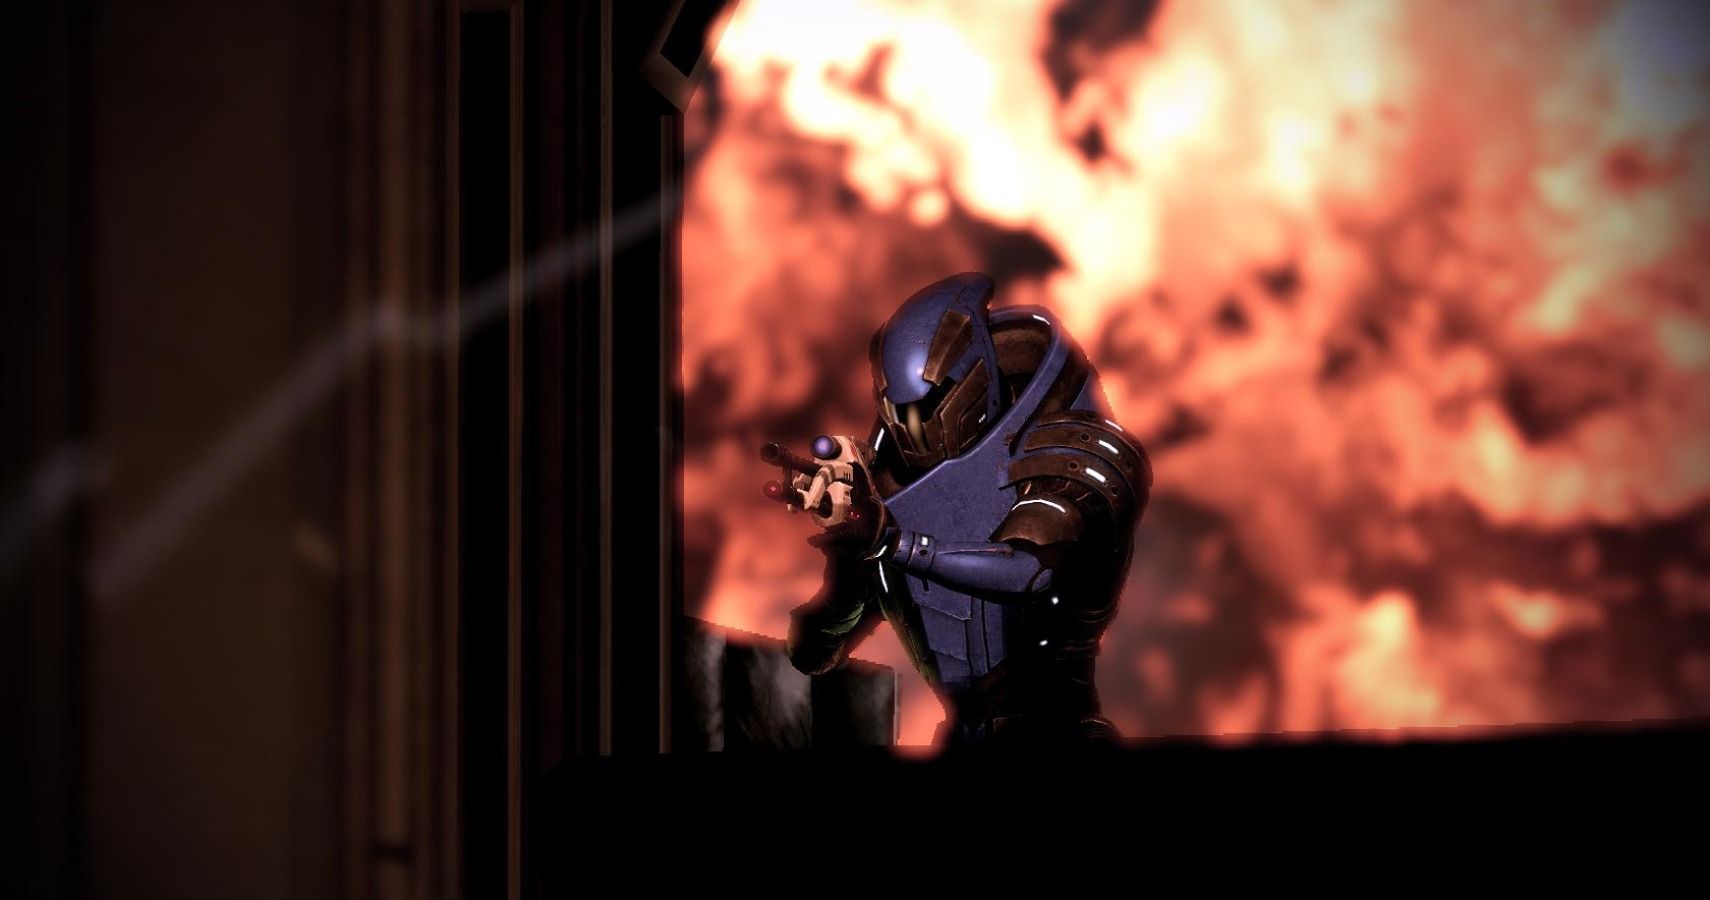 archangel-s-intro-in-mass-effect-2-is-still-an-all-time-high-for-video-games